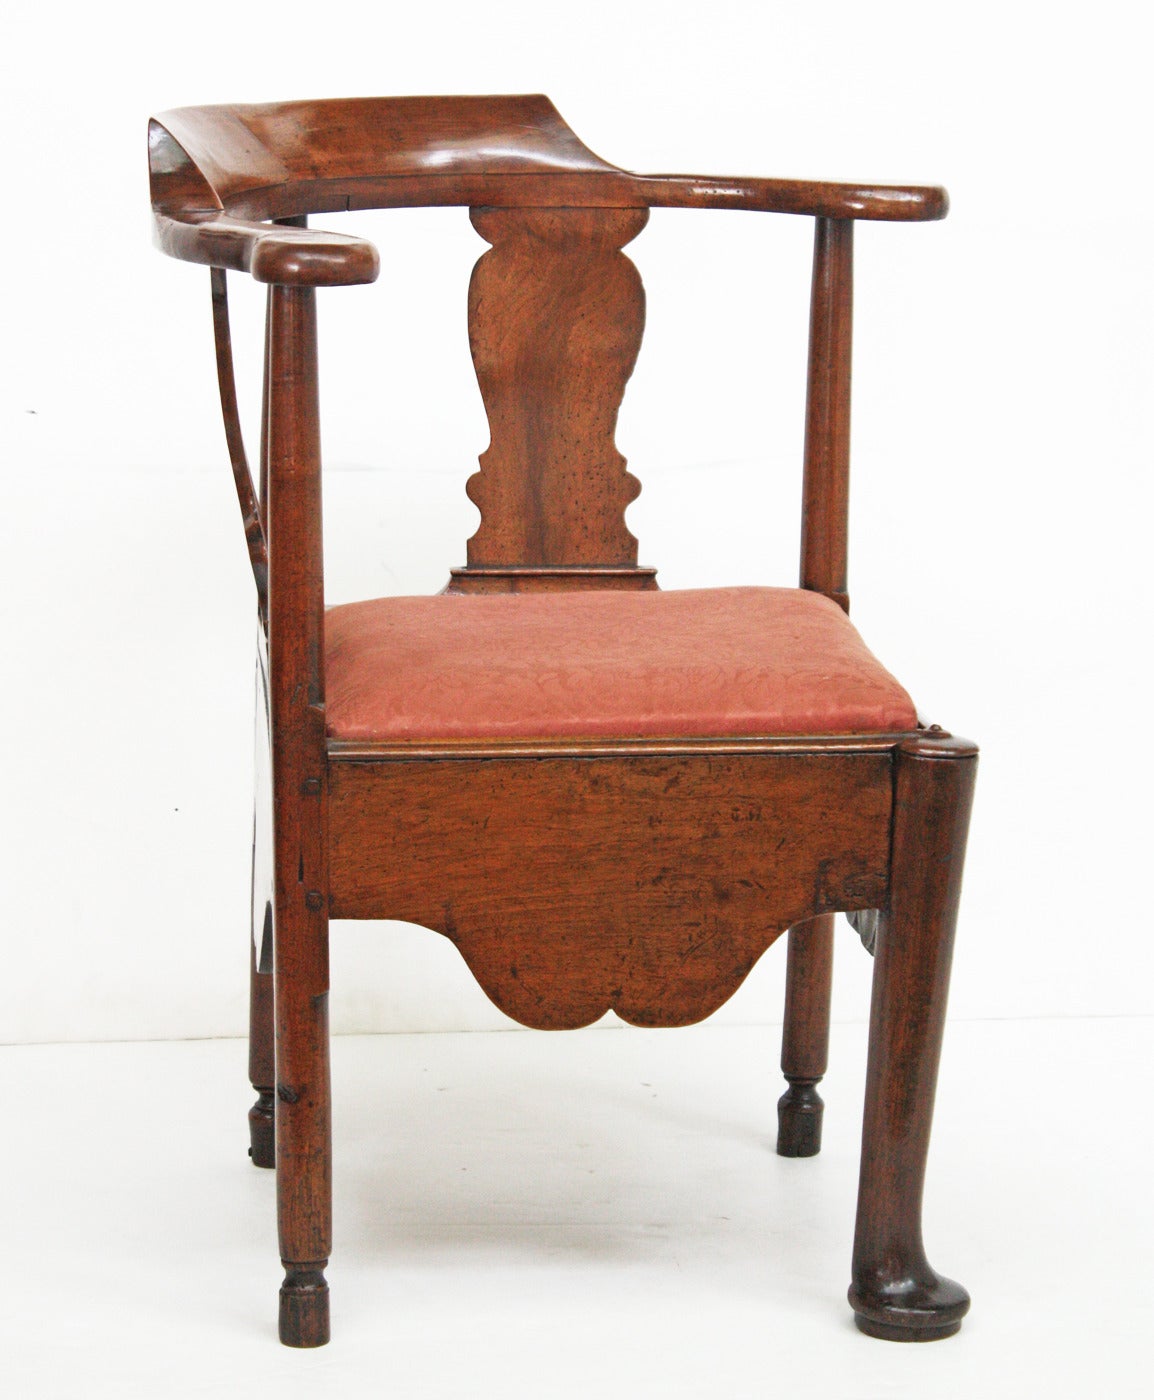 a walnut corner chair with deep apron, turned legs (the single front with a pad foot), solid shaped splats and an upholstered slip seat

pegged tenons (visible) (see Image 7)

old paper lable from a Dallas antiques shop, dated 1984 (see Image